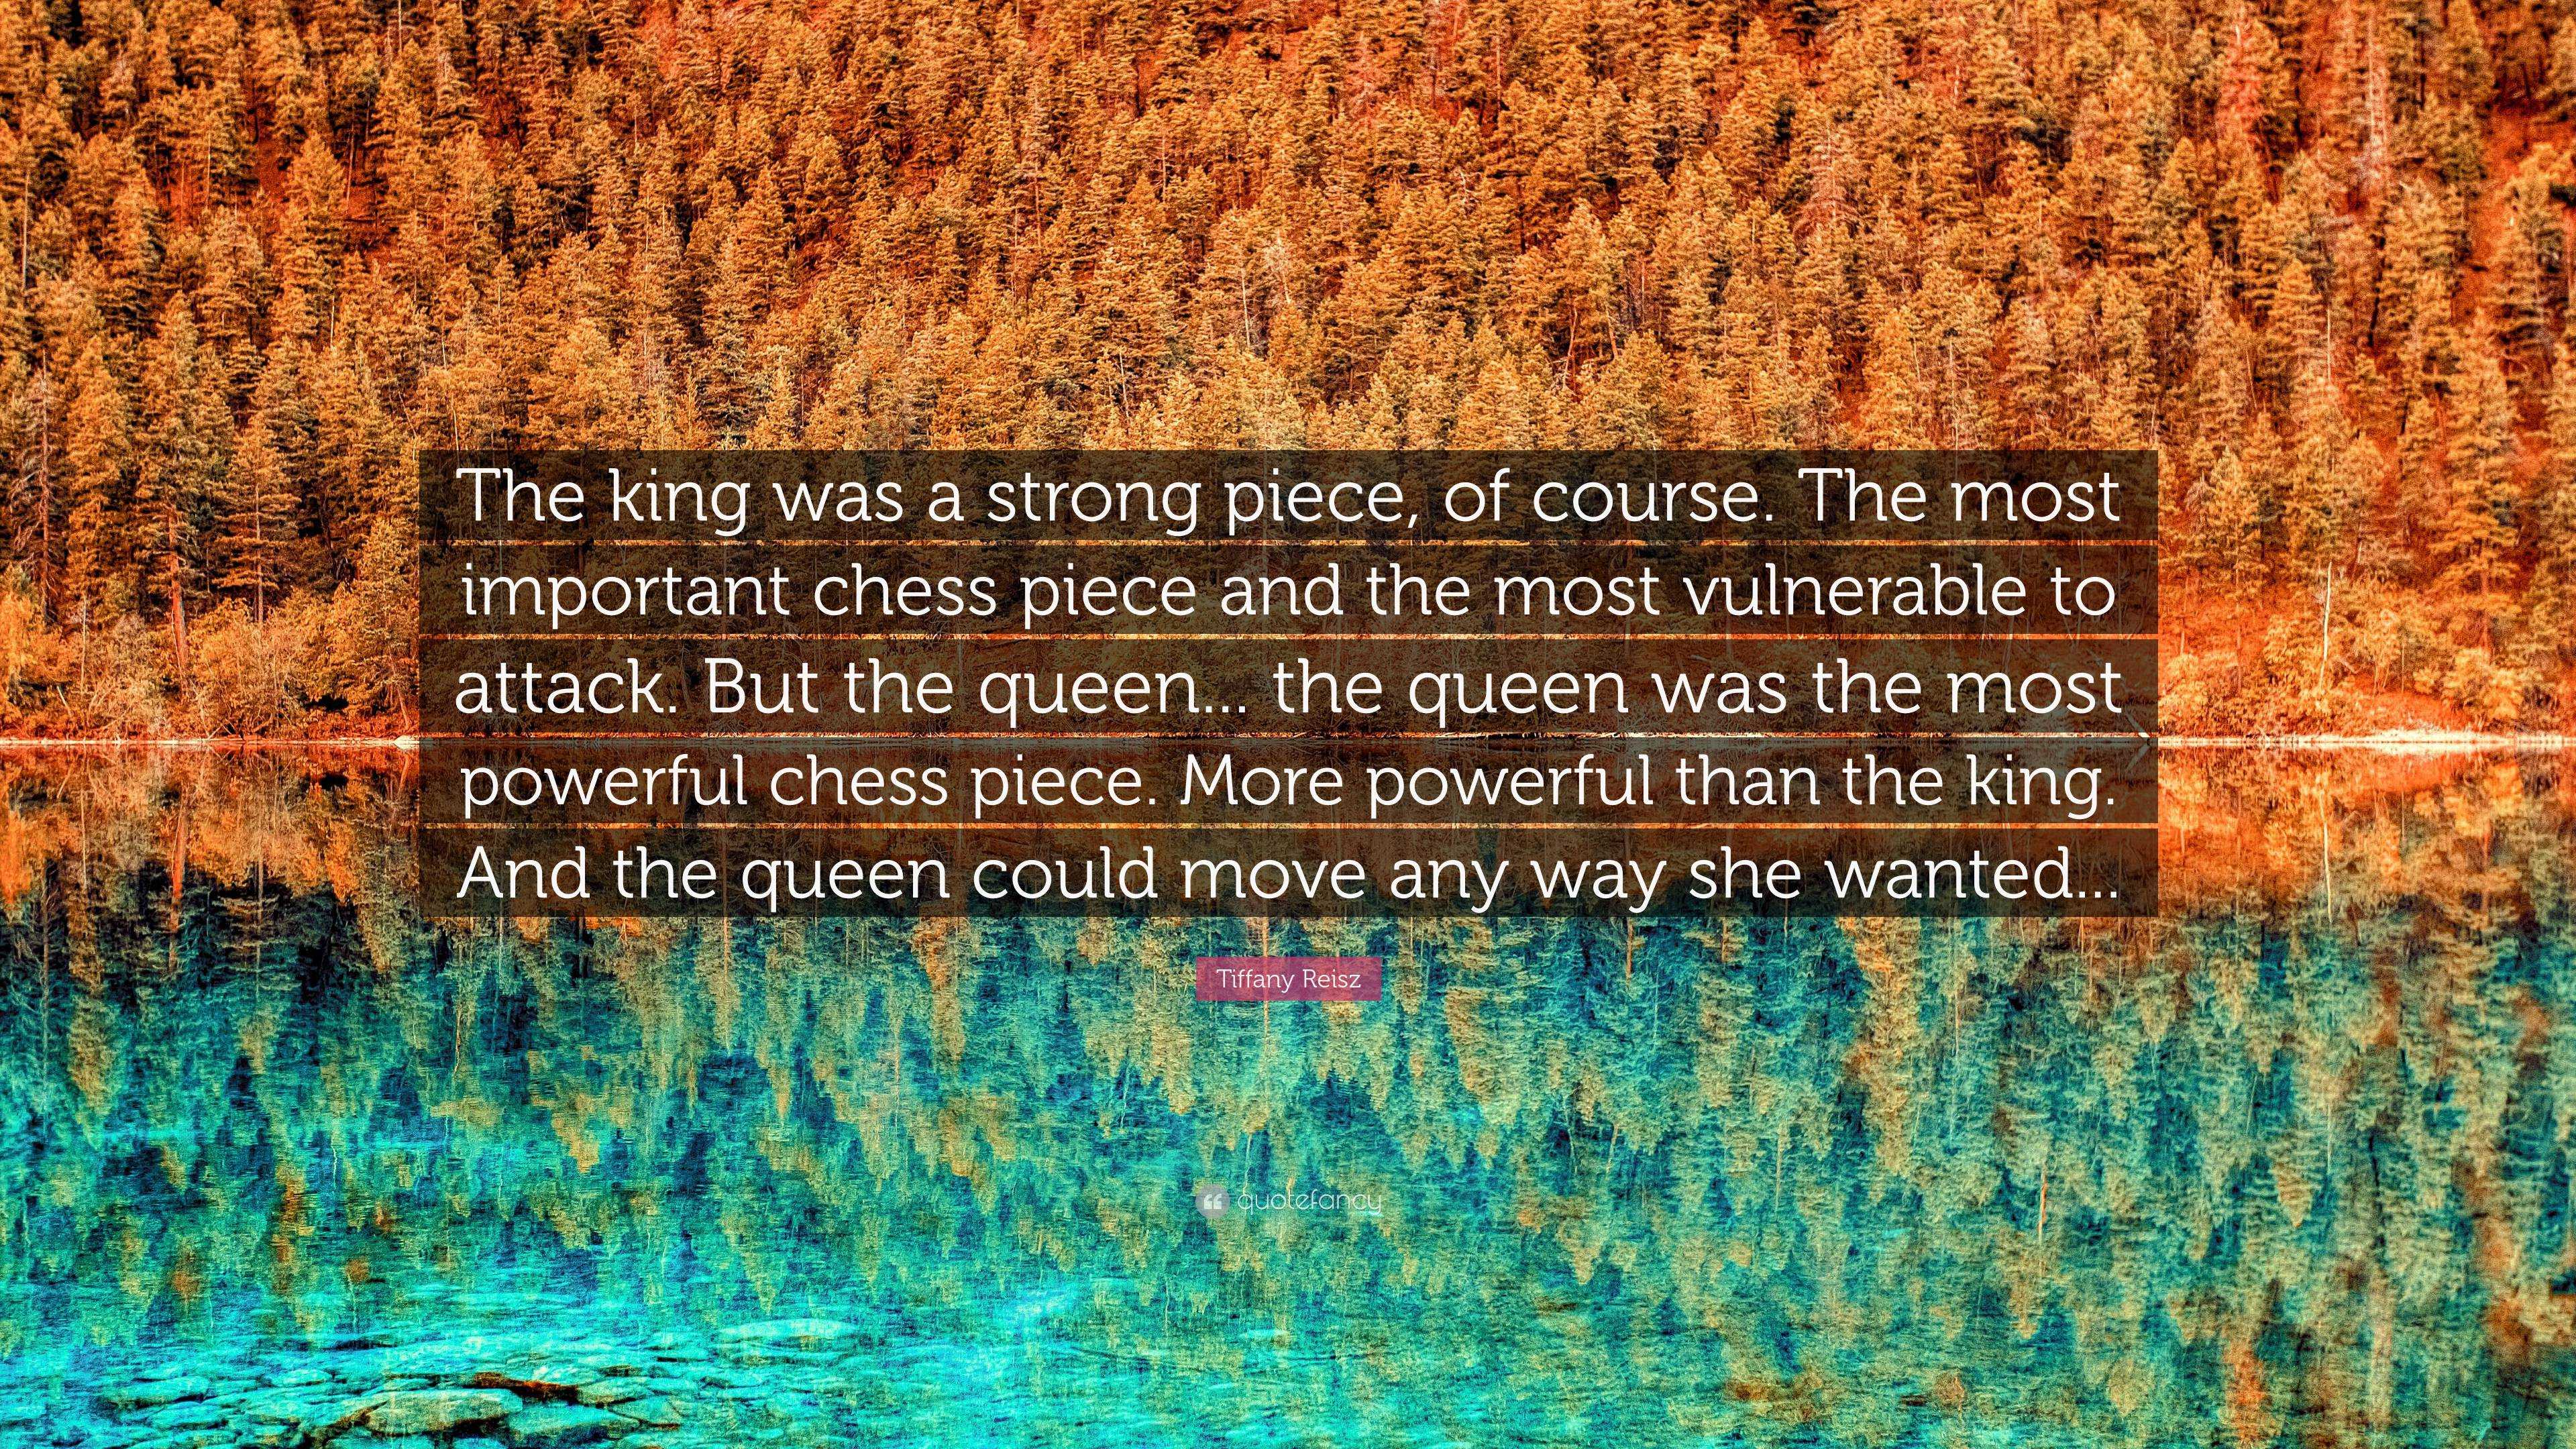 Tiffany Reisz Quote: “The king was a strong piece, of course. The